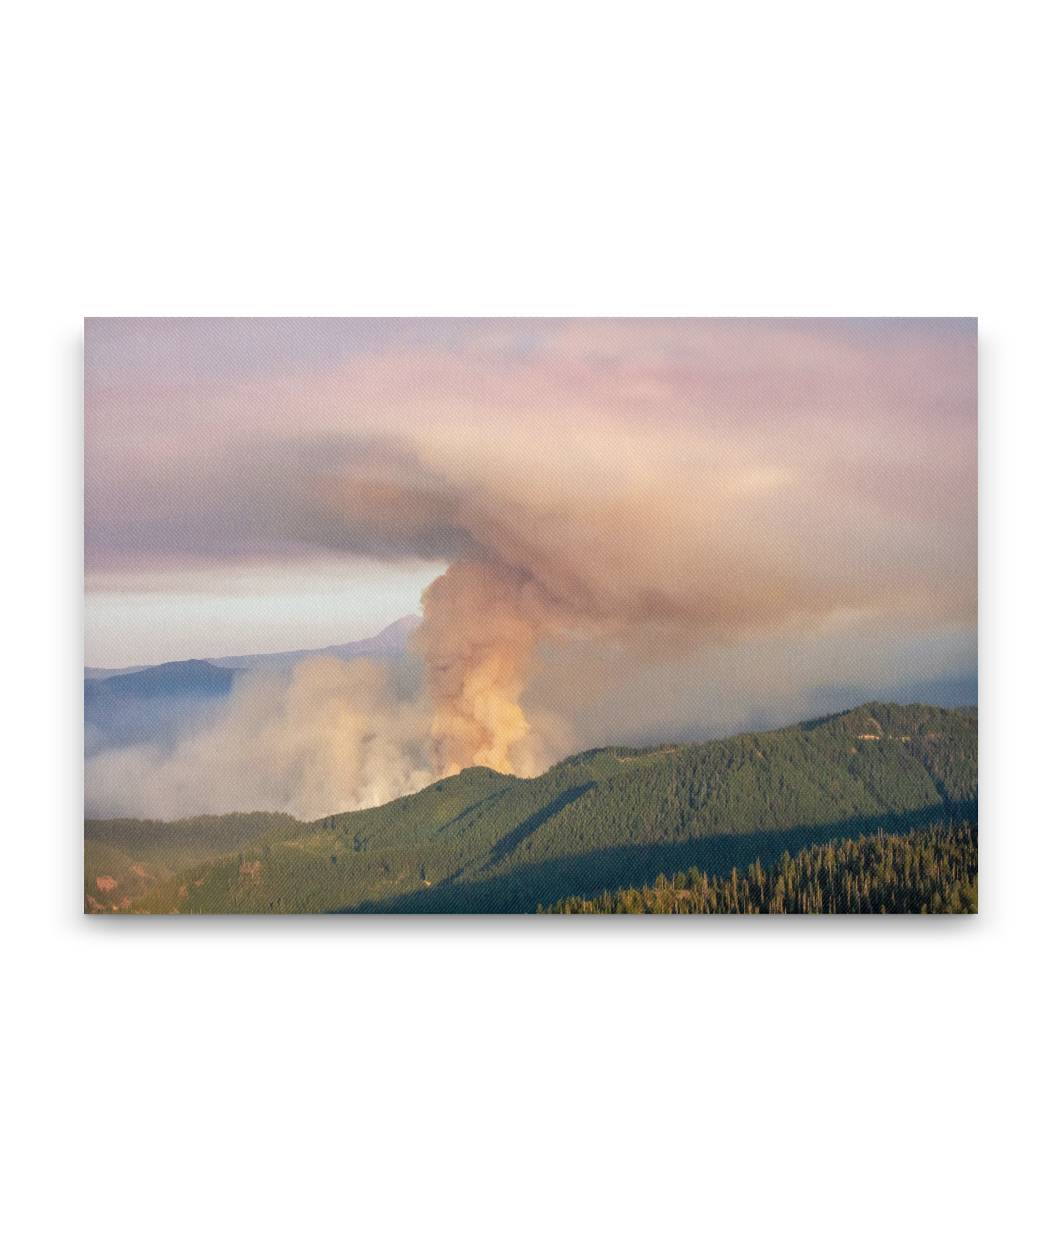 Knoll Wildfire From Carpenter Mountain Fire Lookout, Willamette Forest, Oregon